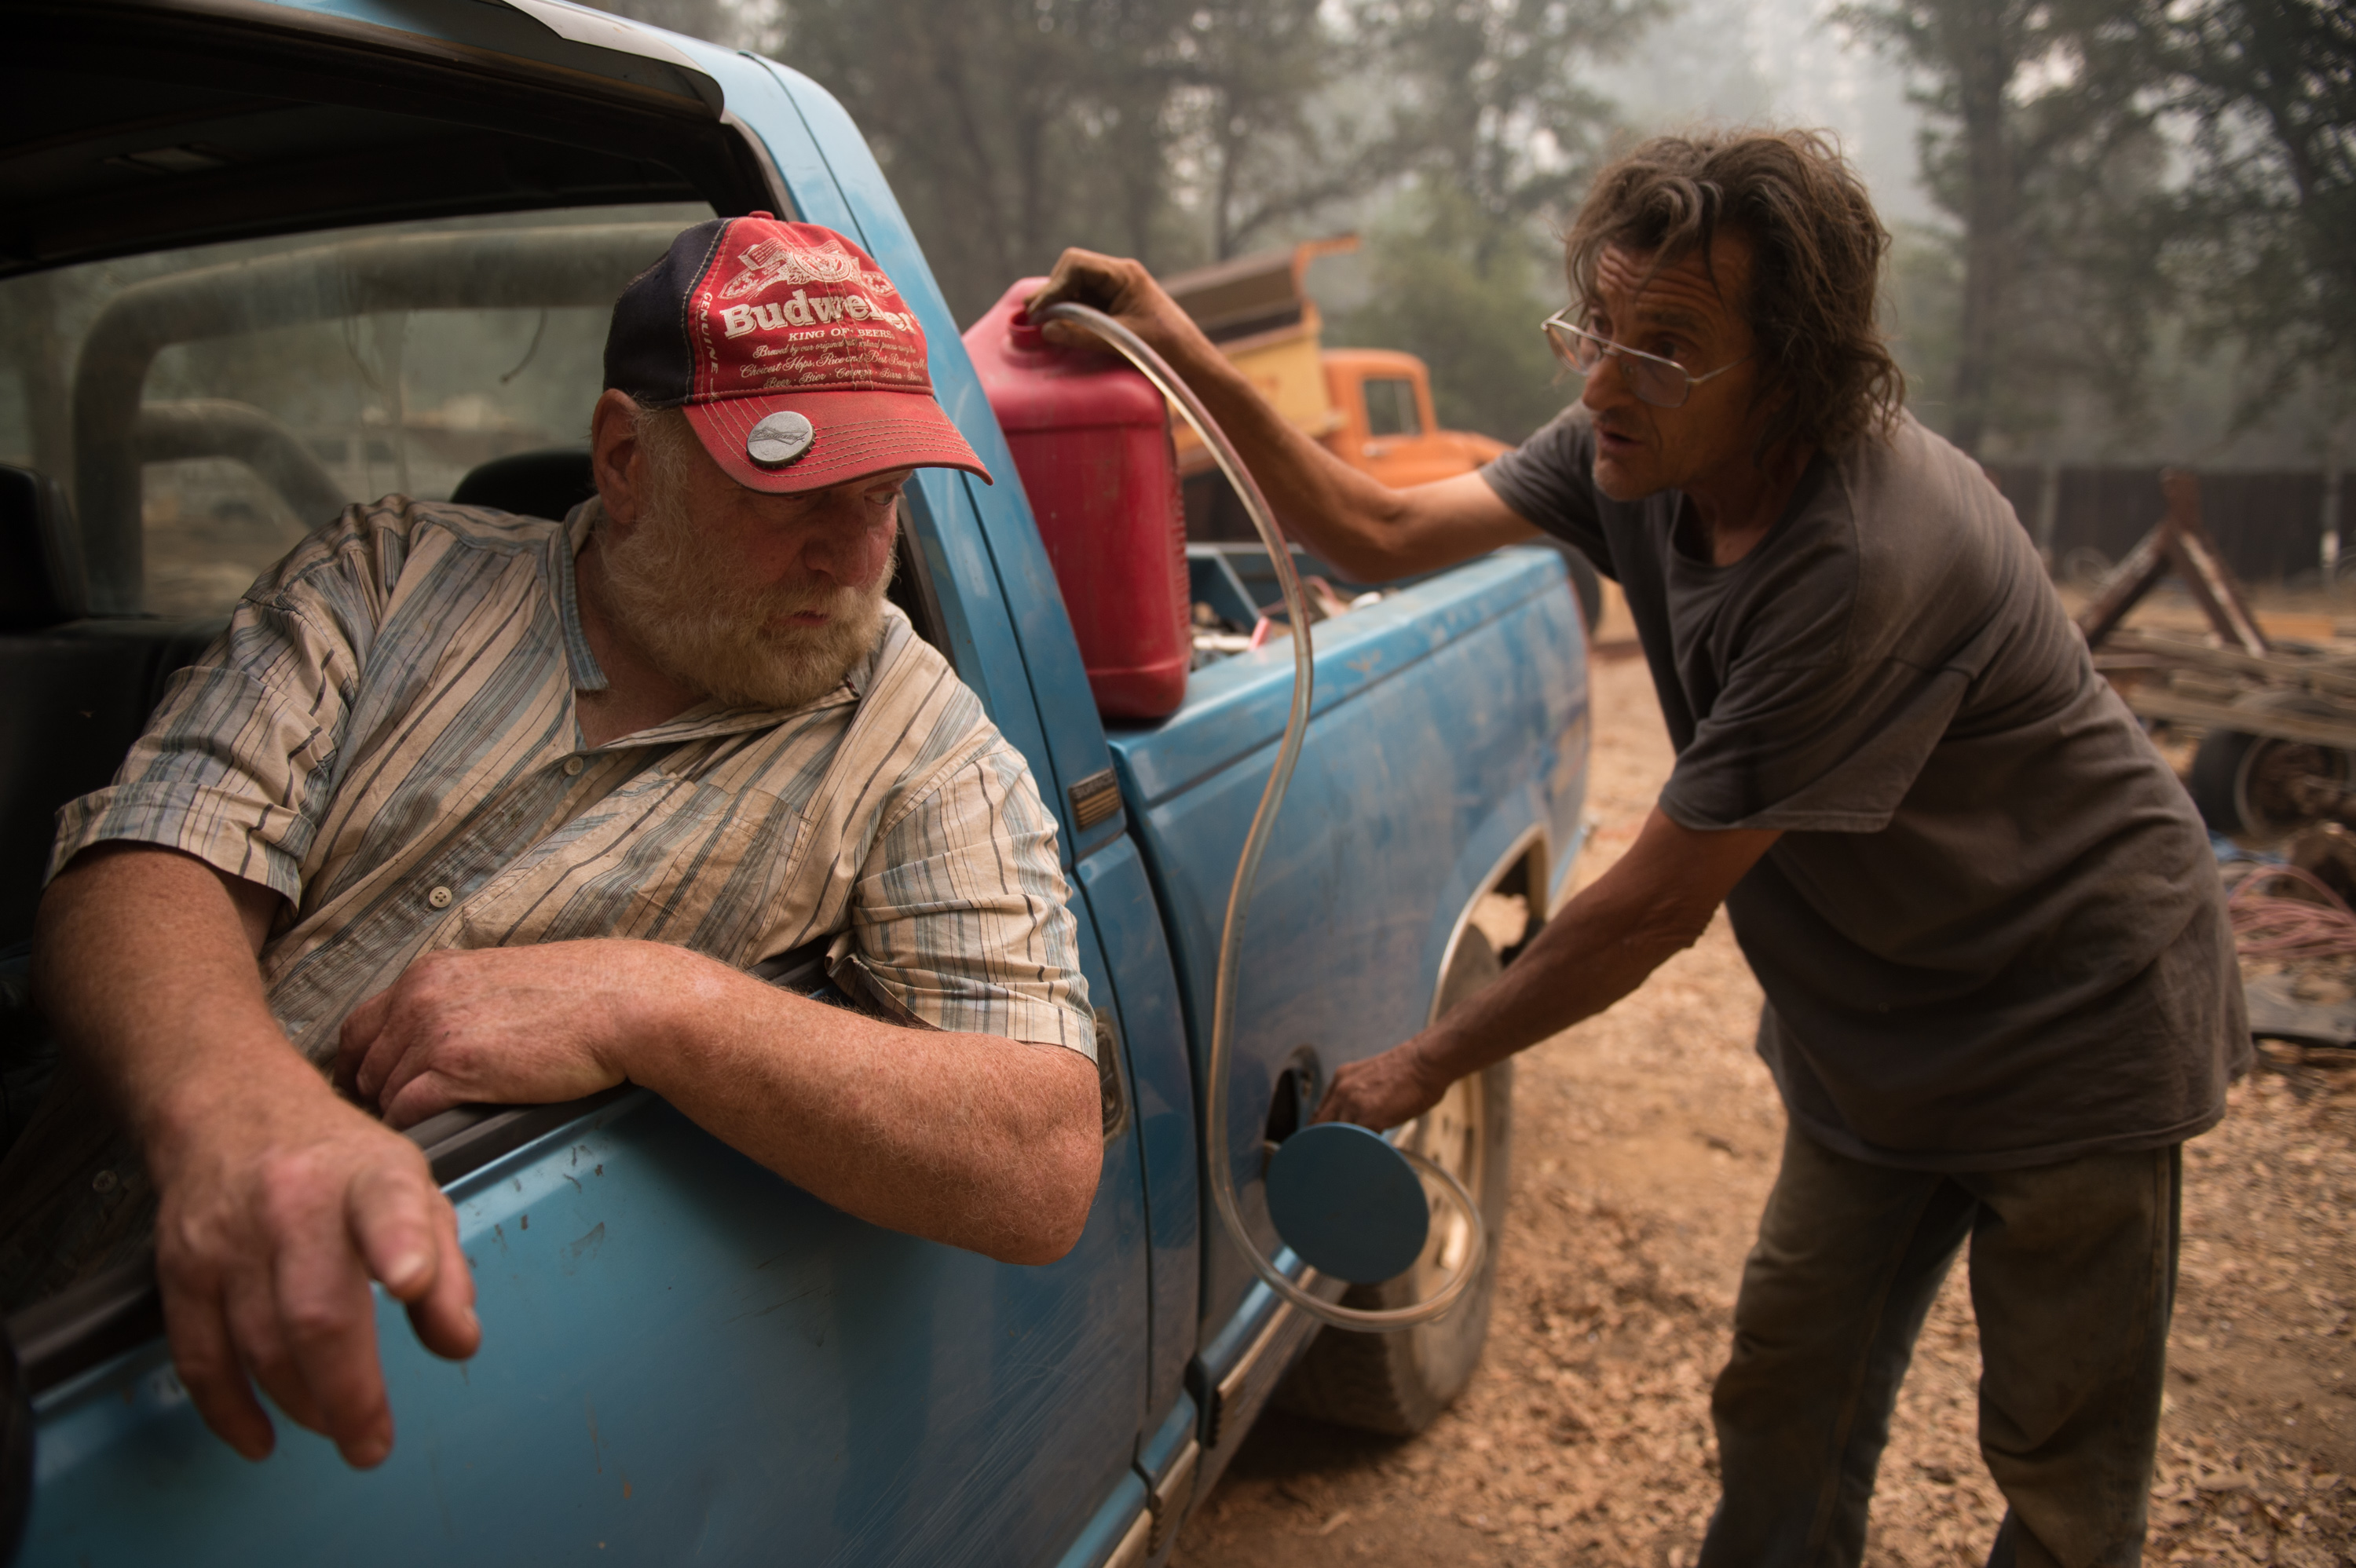 Norman Gussell  fills Steven Van Jones’ tank up with gas in Jackson, Calif. Gov. Jerry Brown declared a state of emergency Friday afternoon in Calaveras  and Amador Counties as many attempt to evacuate. (Photo: Andrew Seng/Newscom)